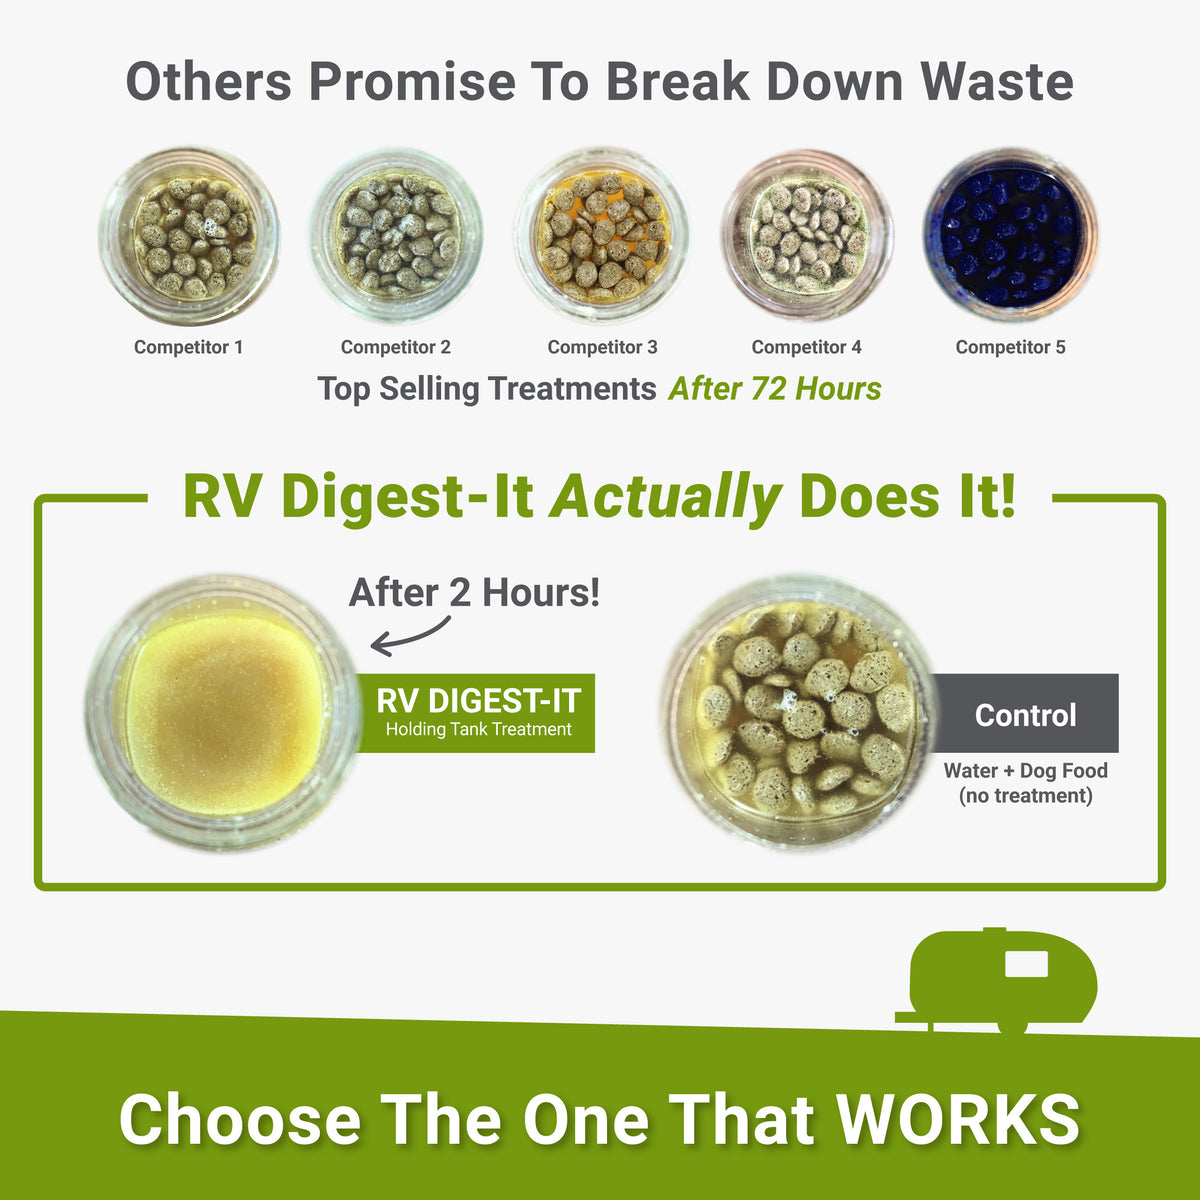 RV Digest-It Beats the competition at waste breakdown. Choose a treatment that works!